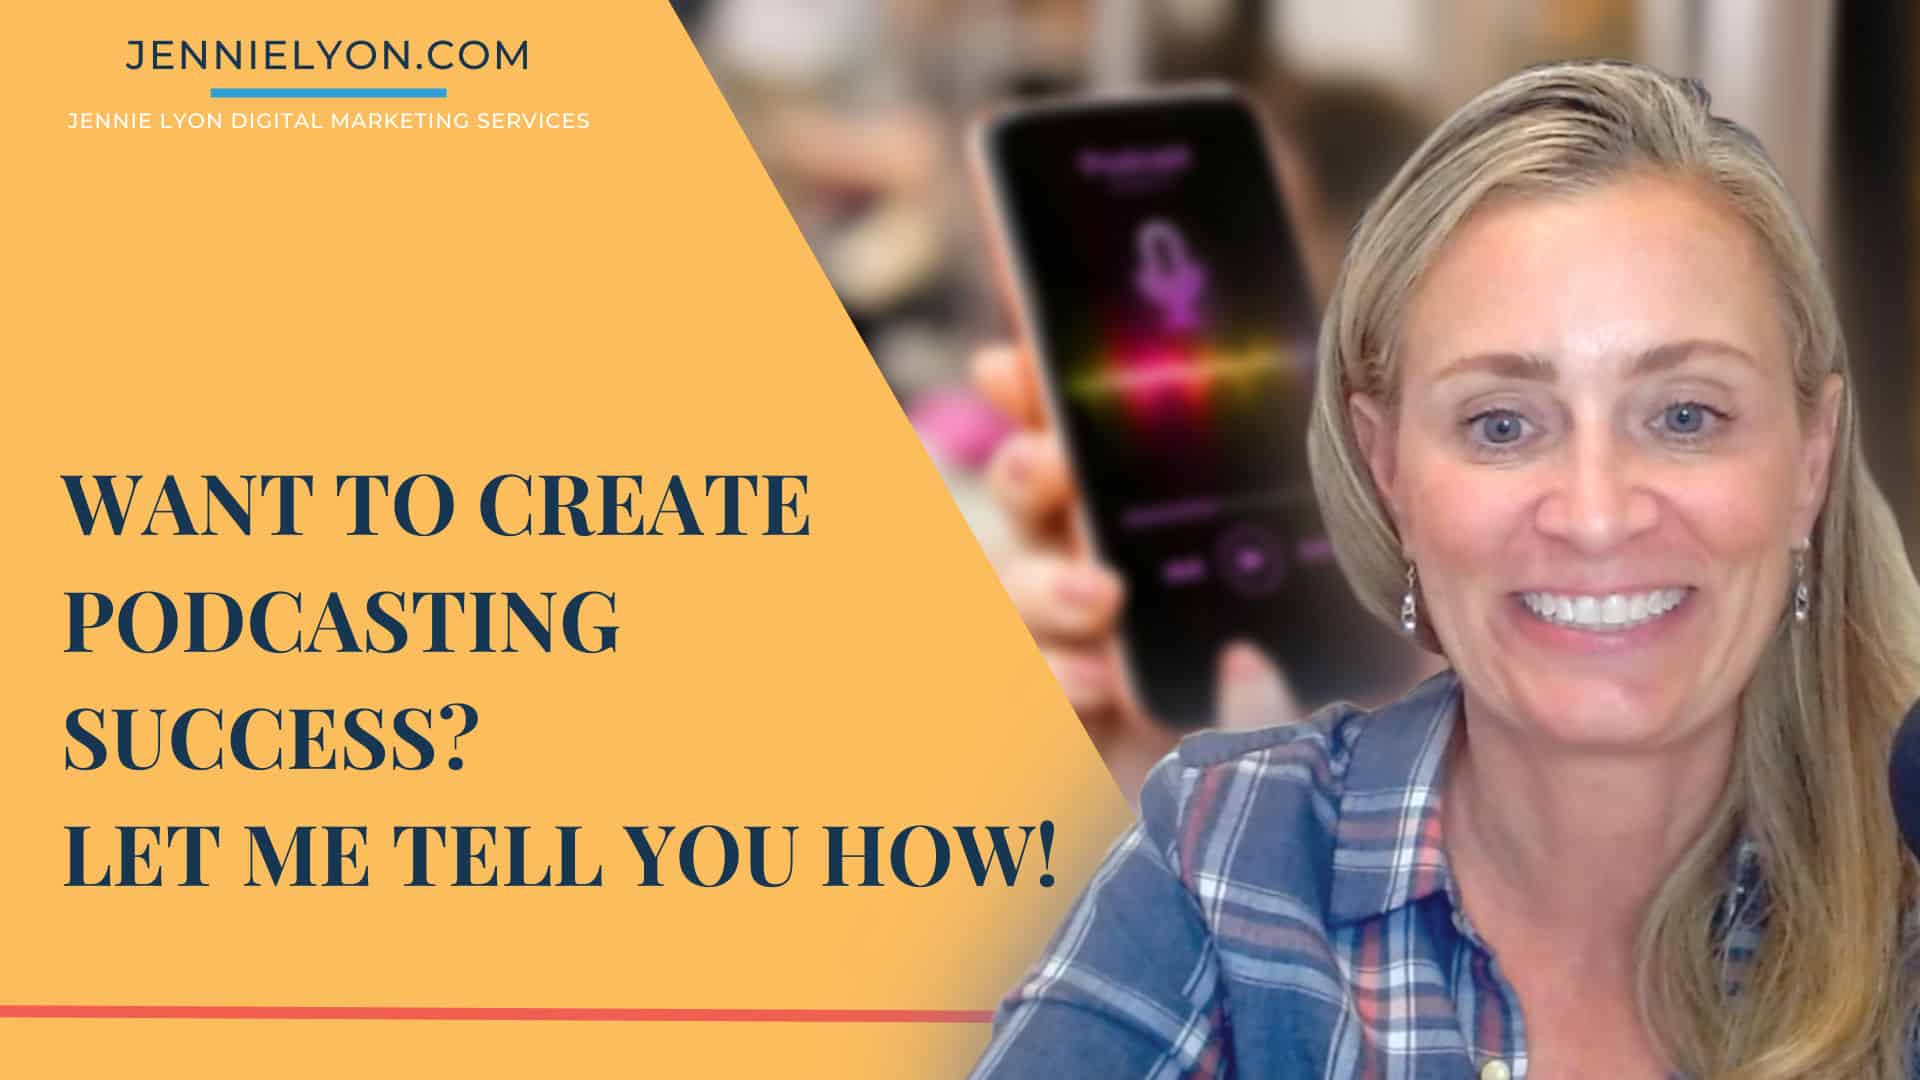 Want to Create Podcasting Success? Let Me Tell You How!